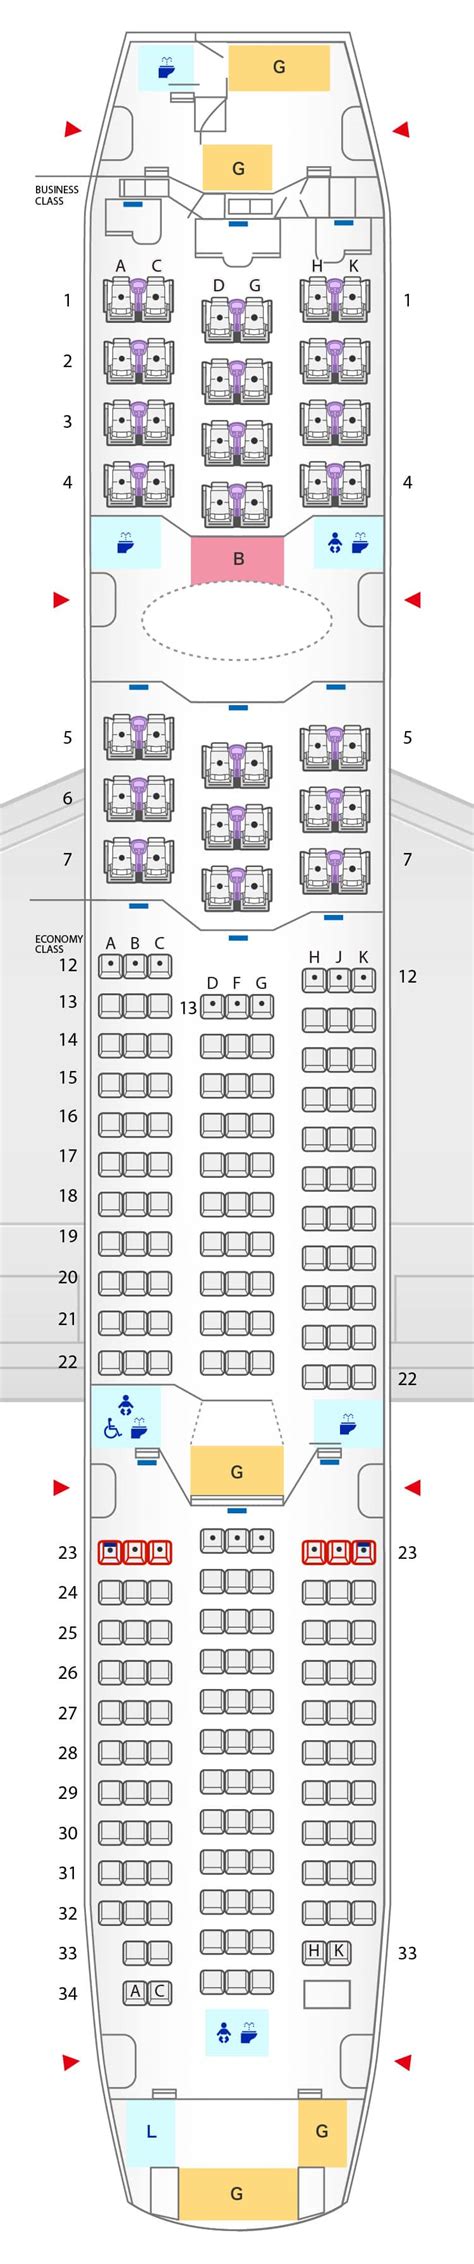 Challenges of Implementing MAP Boeing 787 8 Seat Map